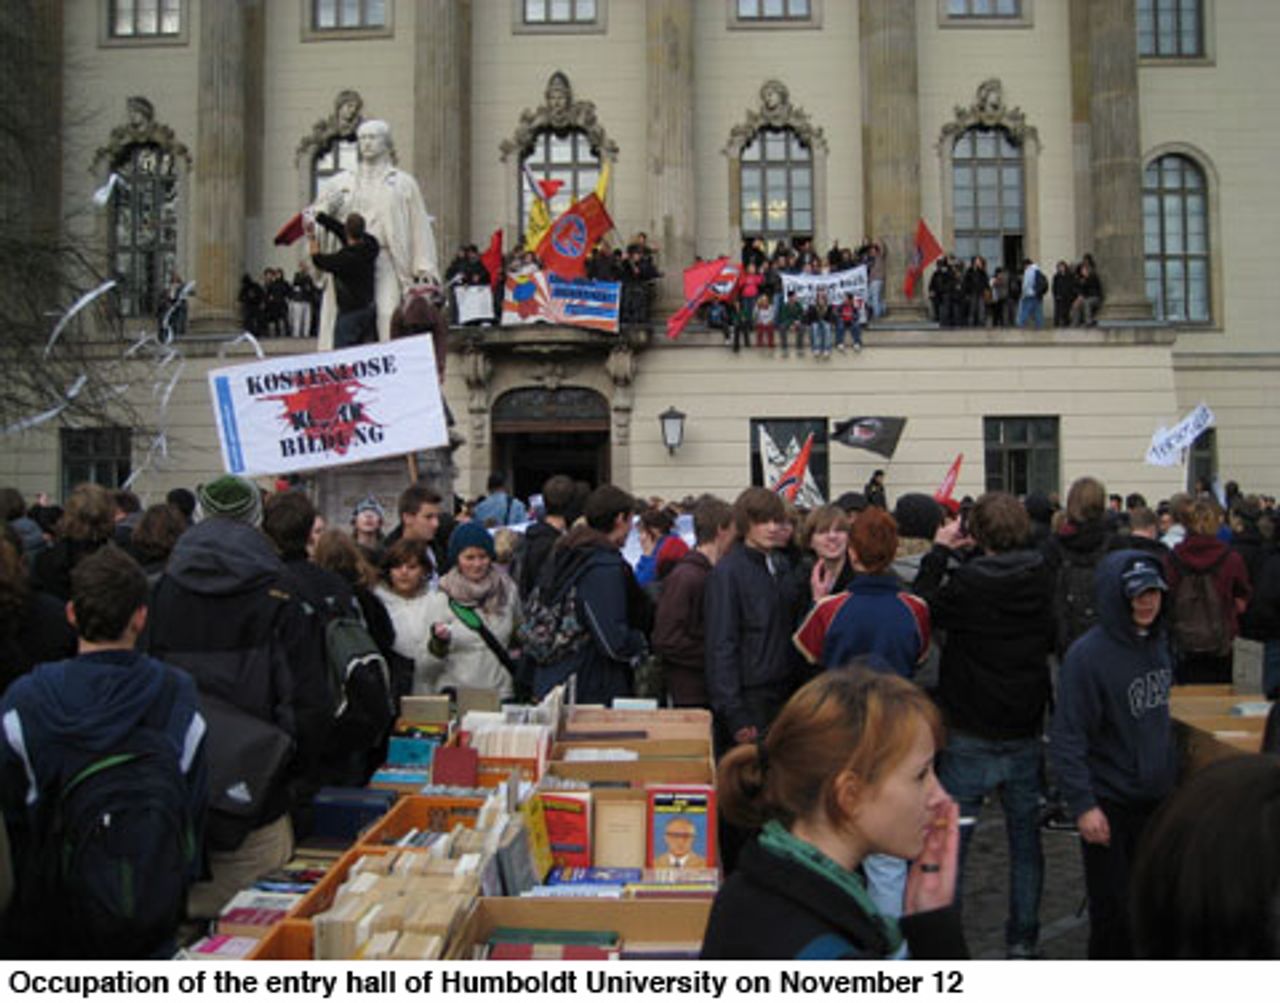 Occupation of the entry hall of Humboldt University on November 12